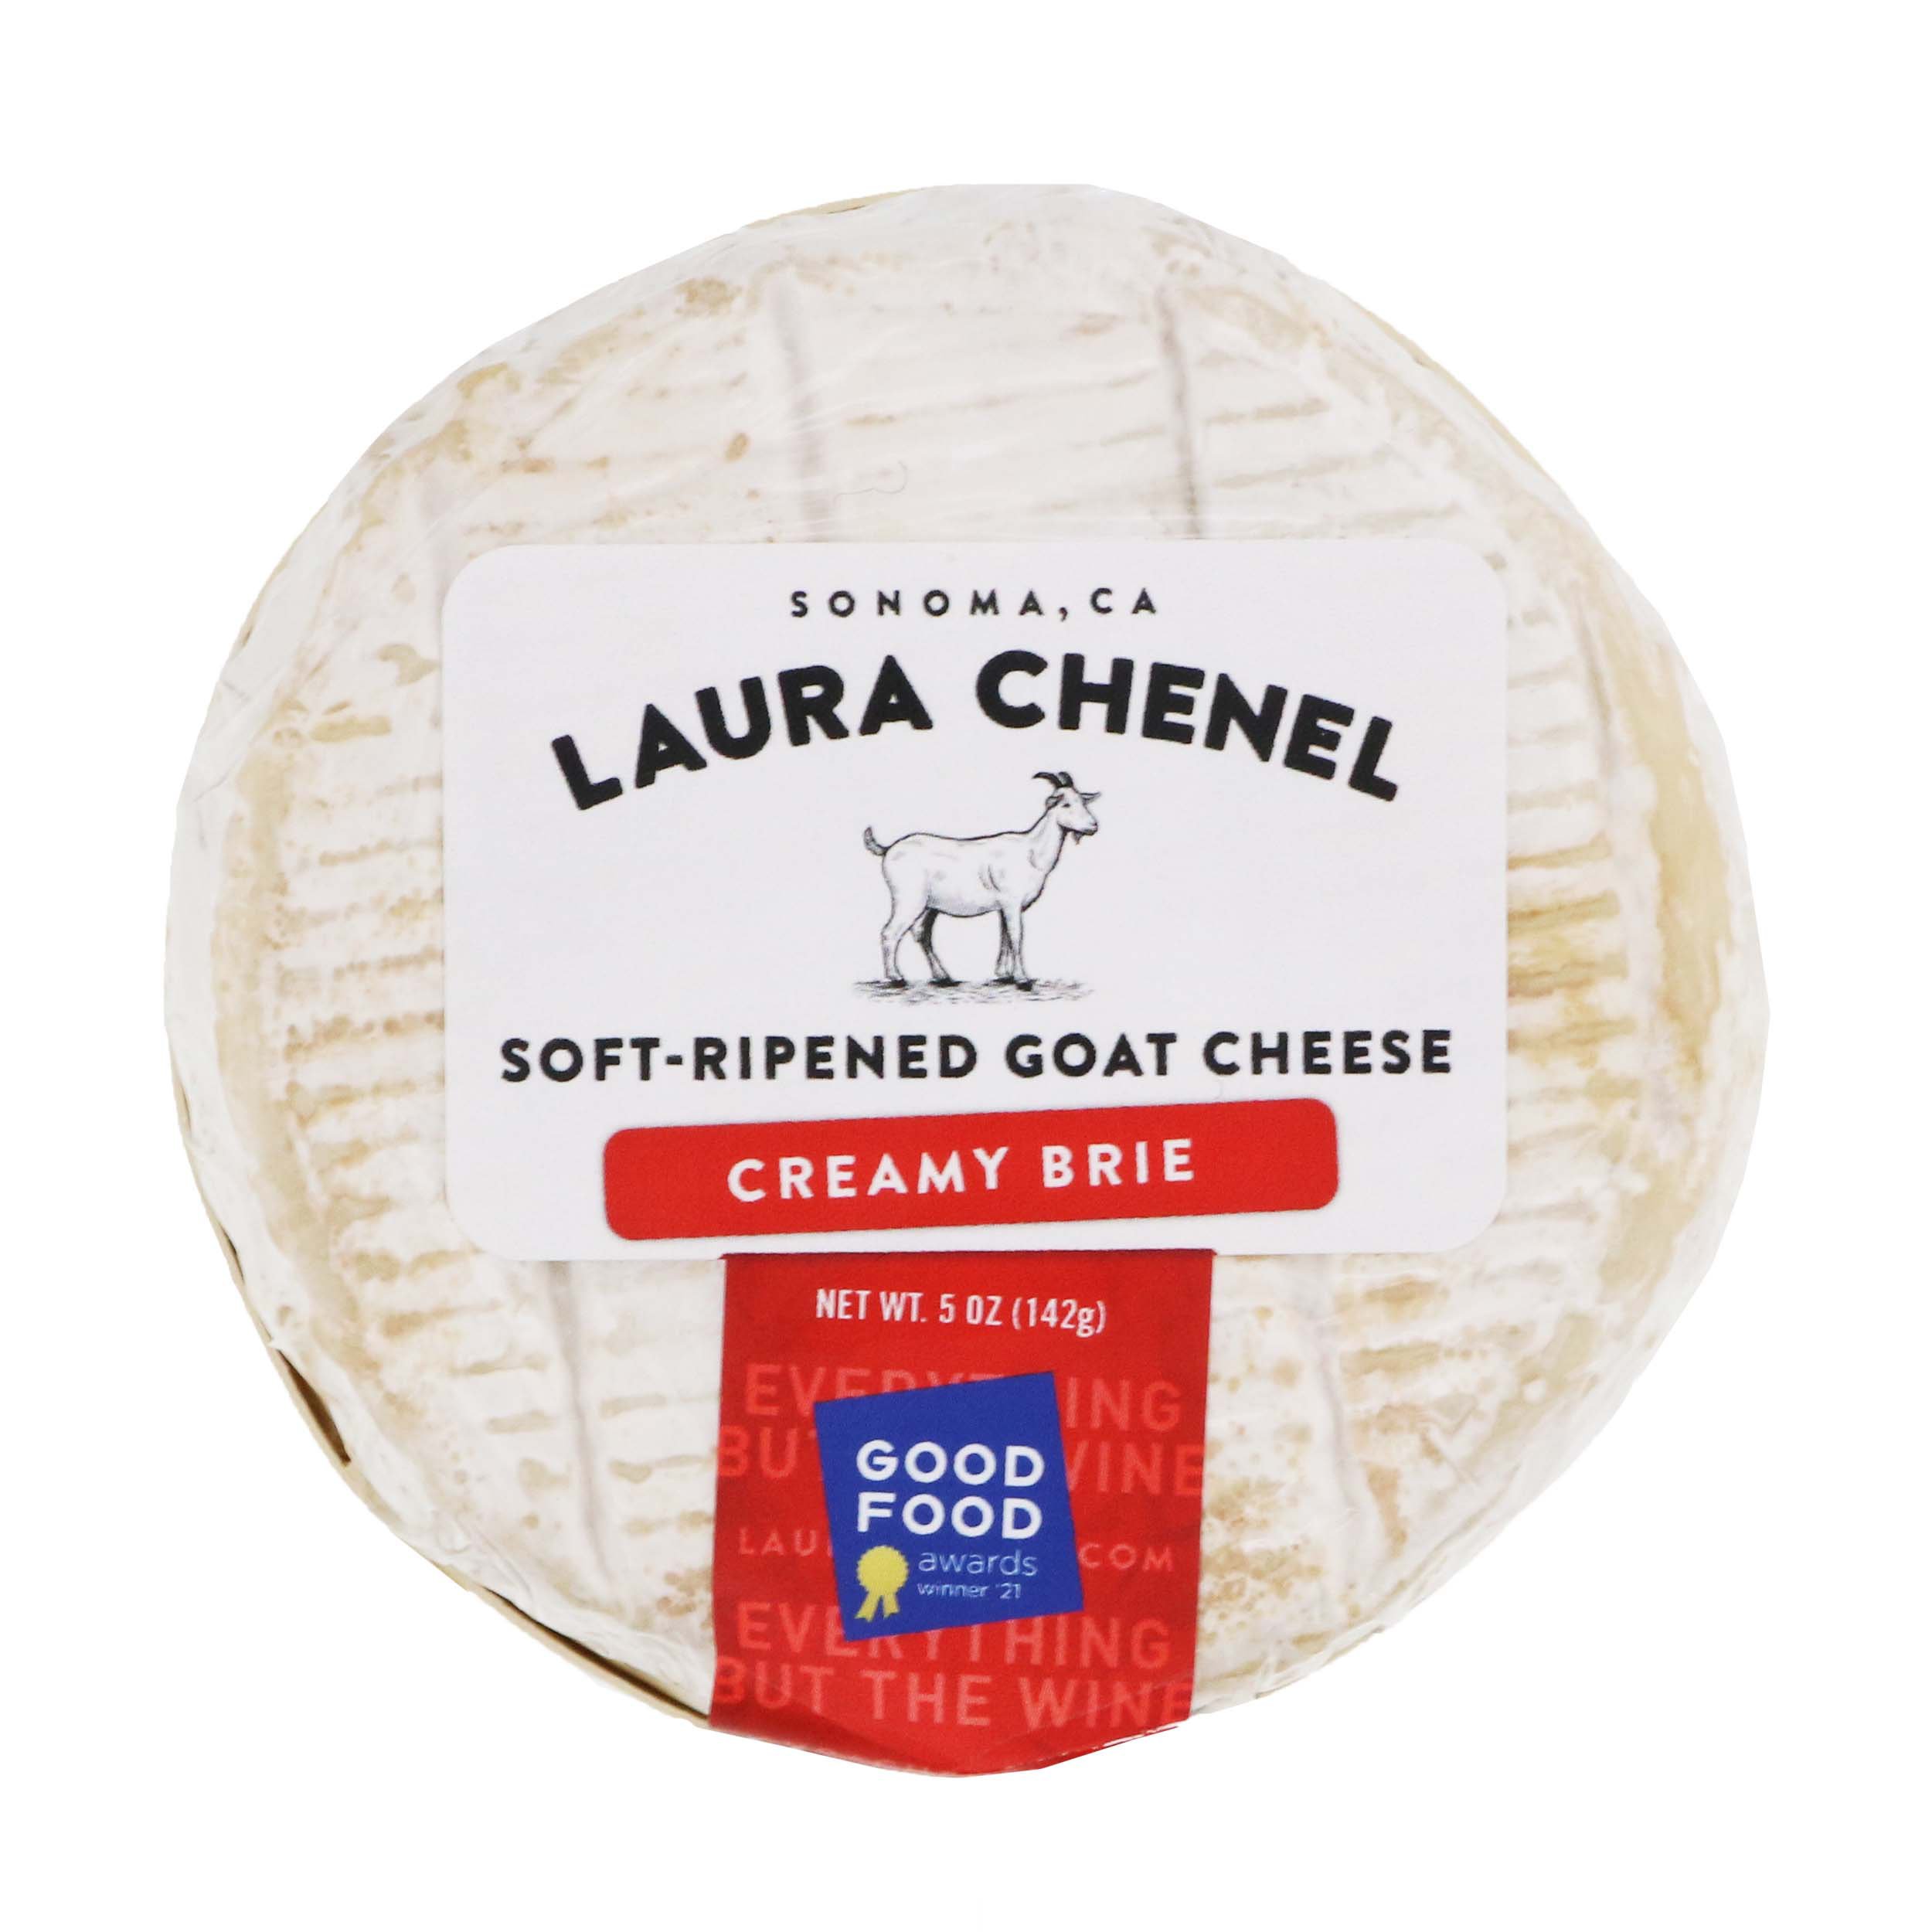 laura-chenel-soft-ripened-goat-brie-shop-cheese-at-h-e-b